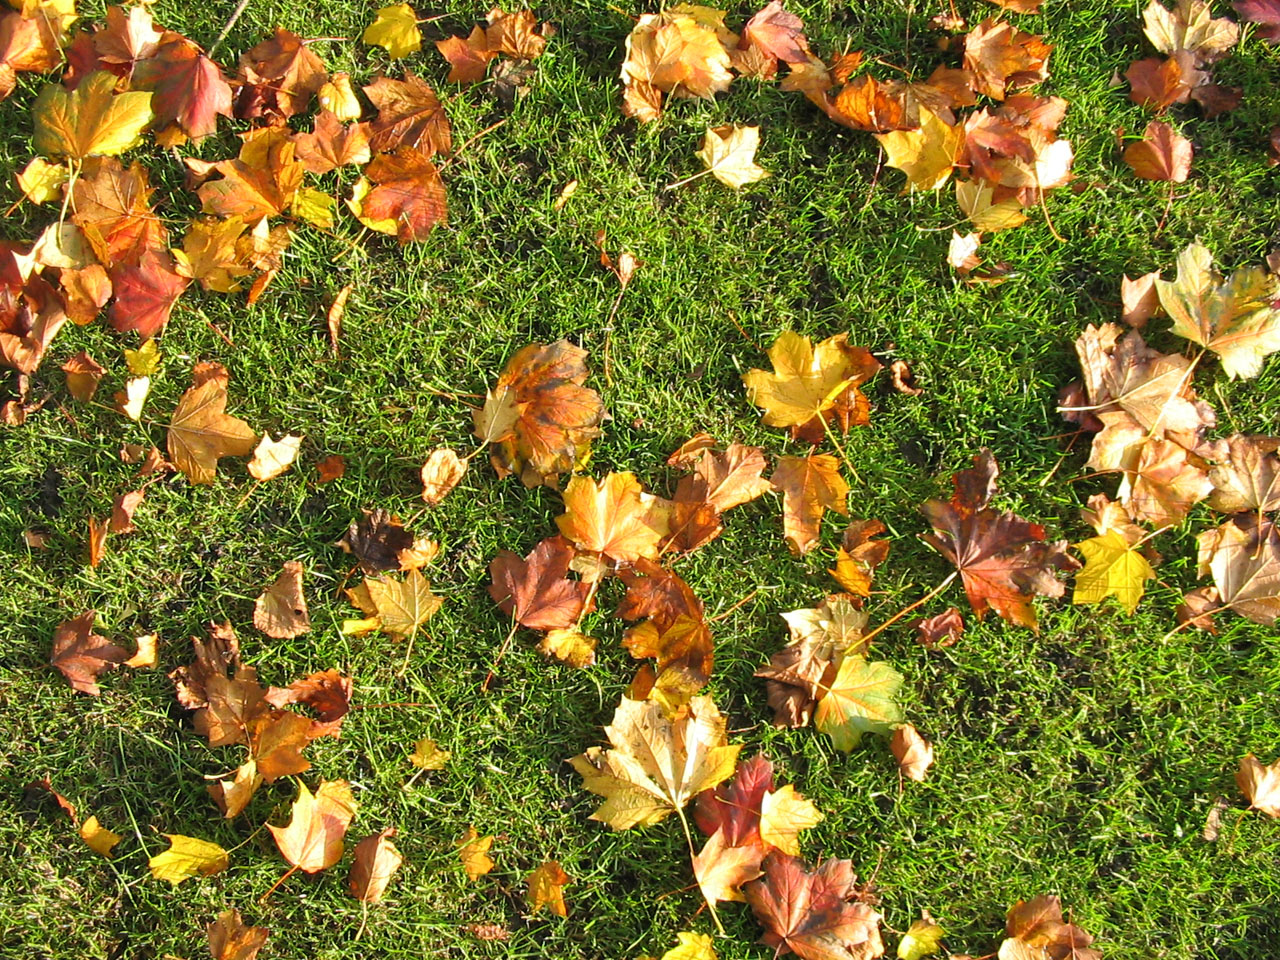 Brown Leaves On Grass